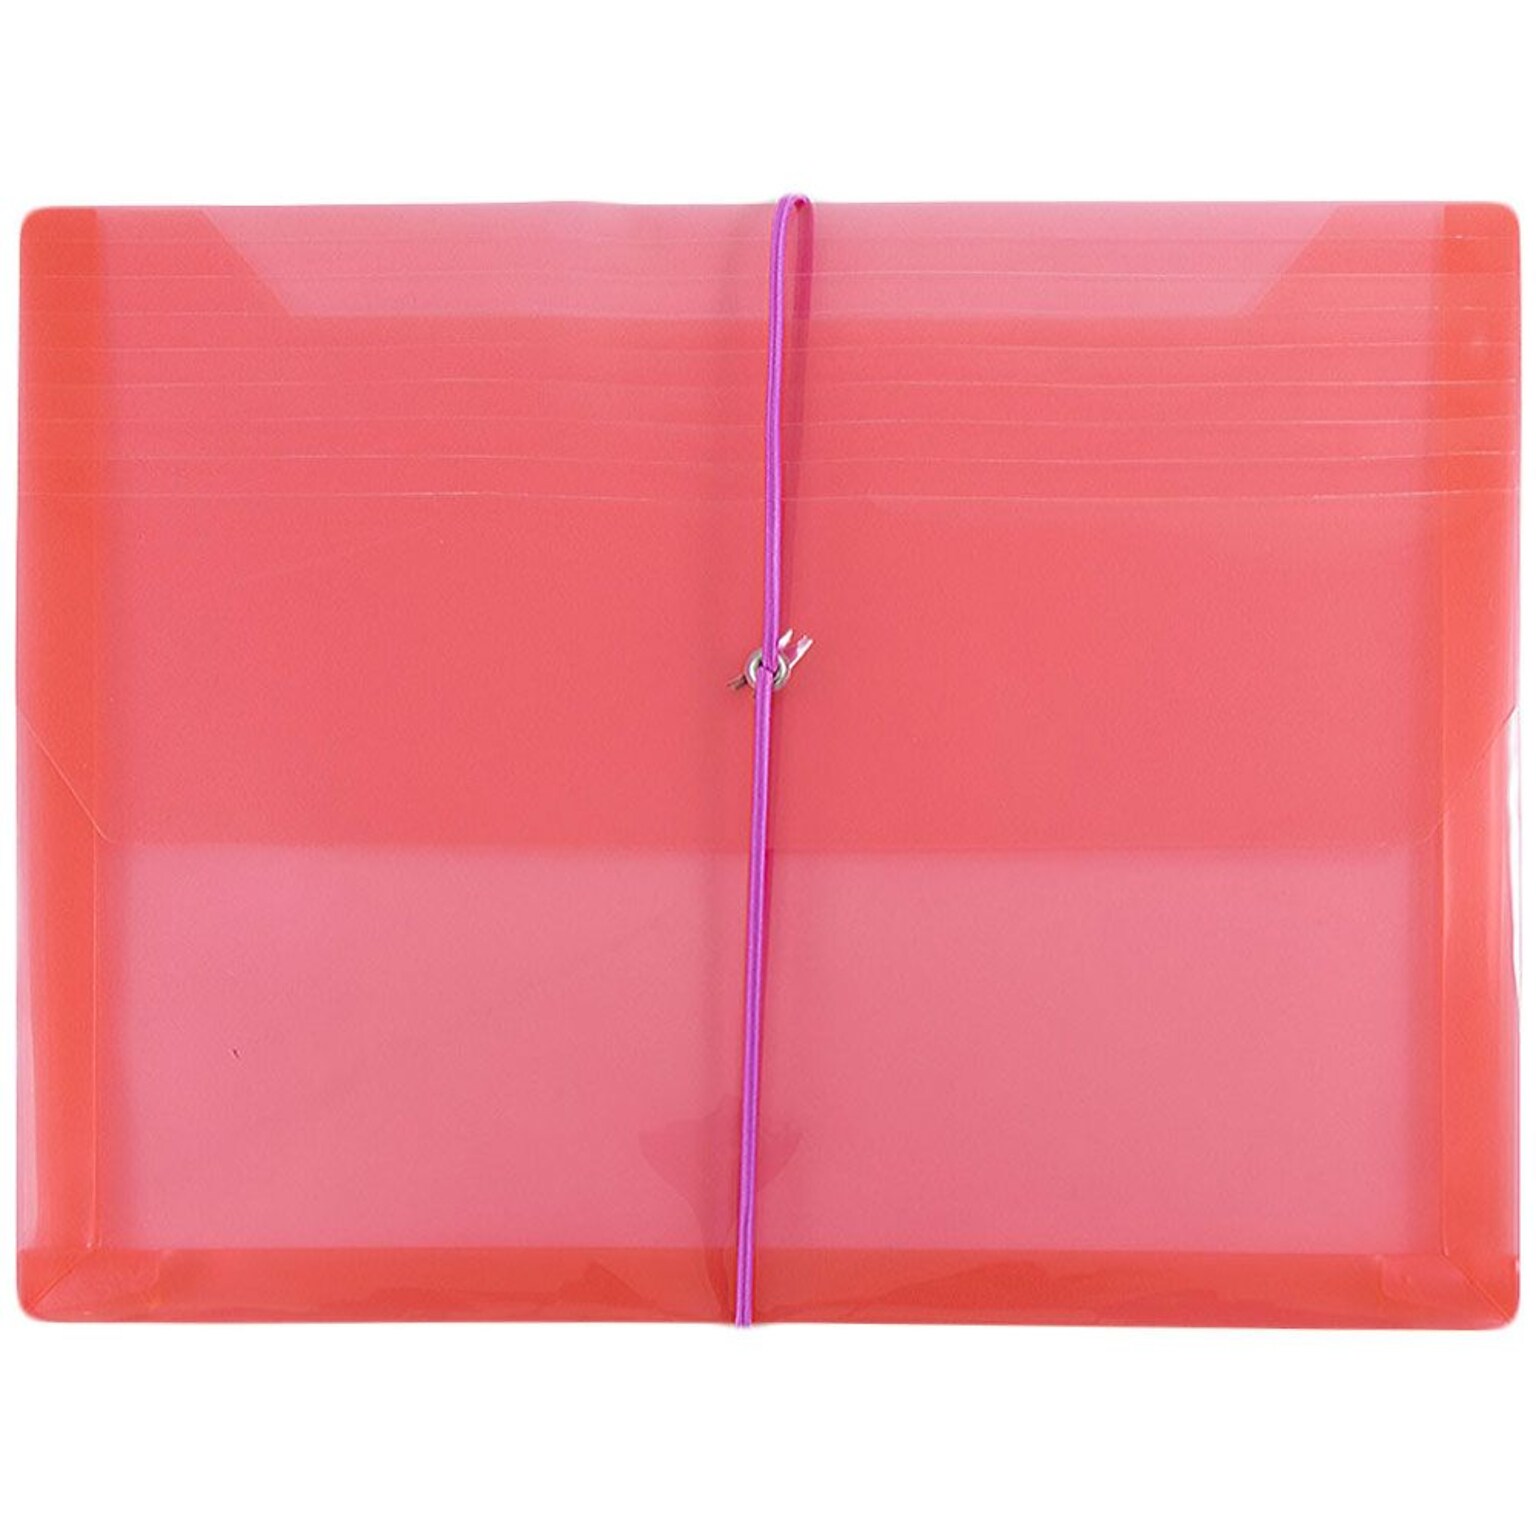 JAM Paper® Plastic Envelopes with Elastic Band Closure, 9.75 x 13 with 2.625 Inch Expansion, Red, 12/Pack (218E25REB)